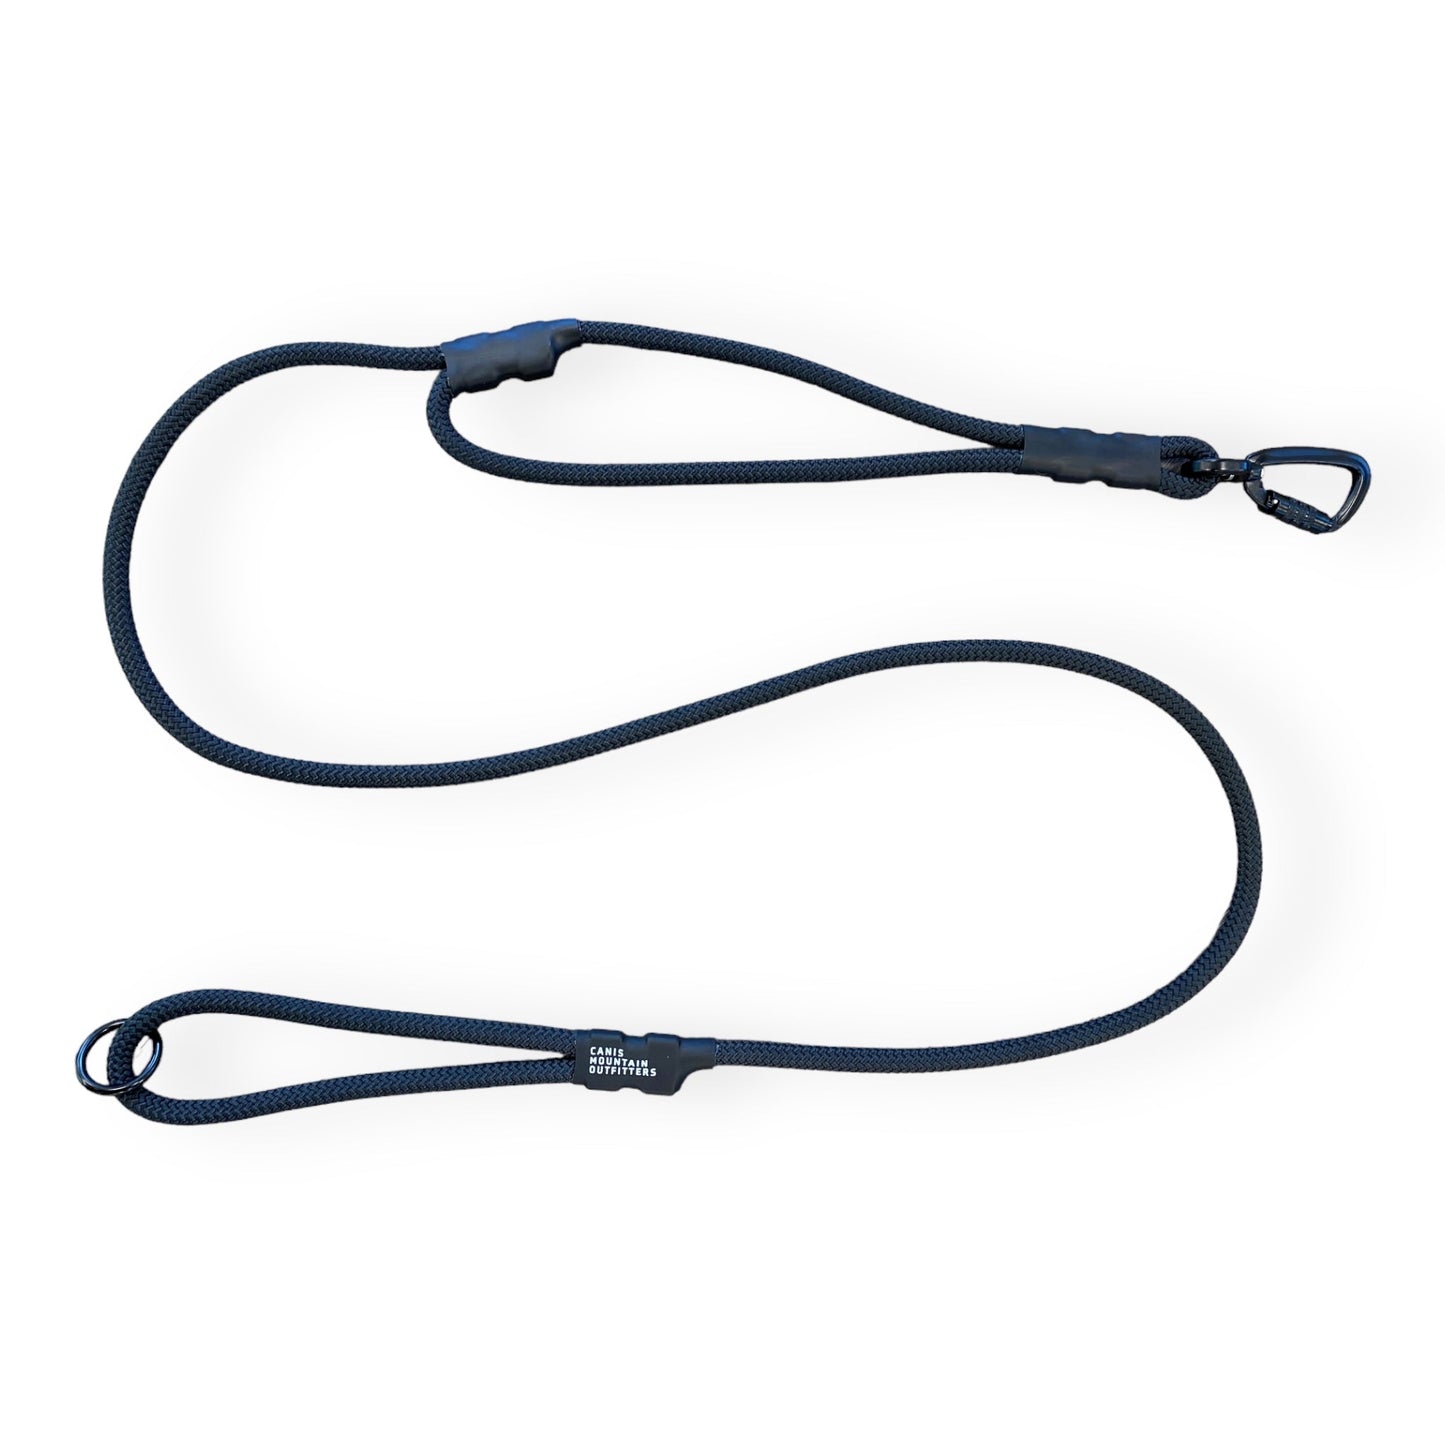 Limited Edition - Clip Lead with traffic handle RS